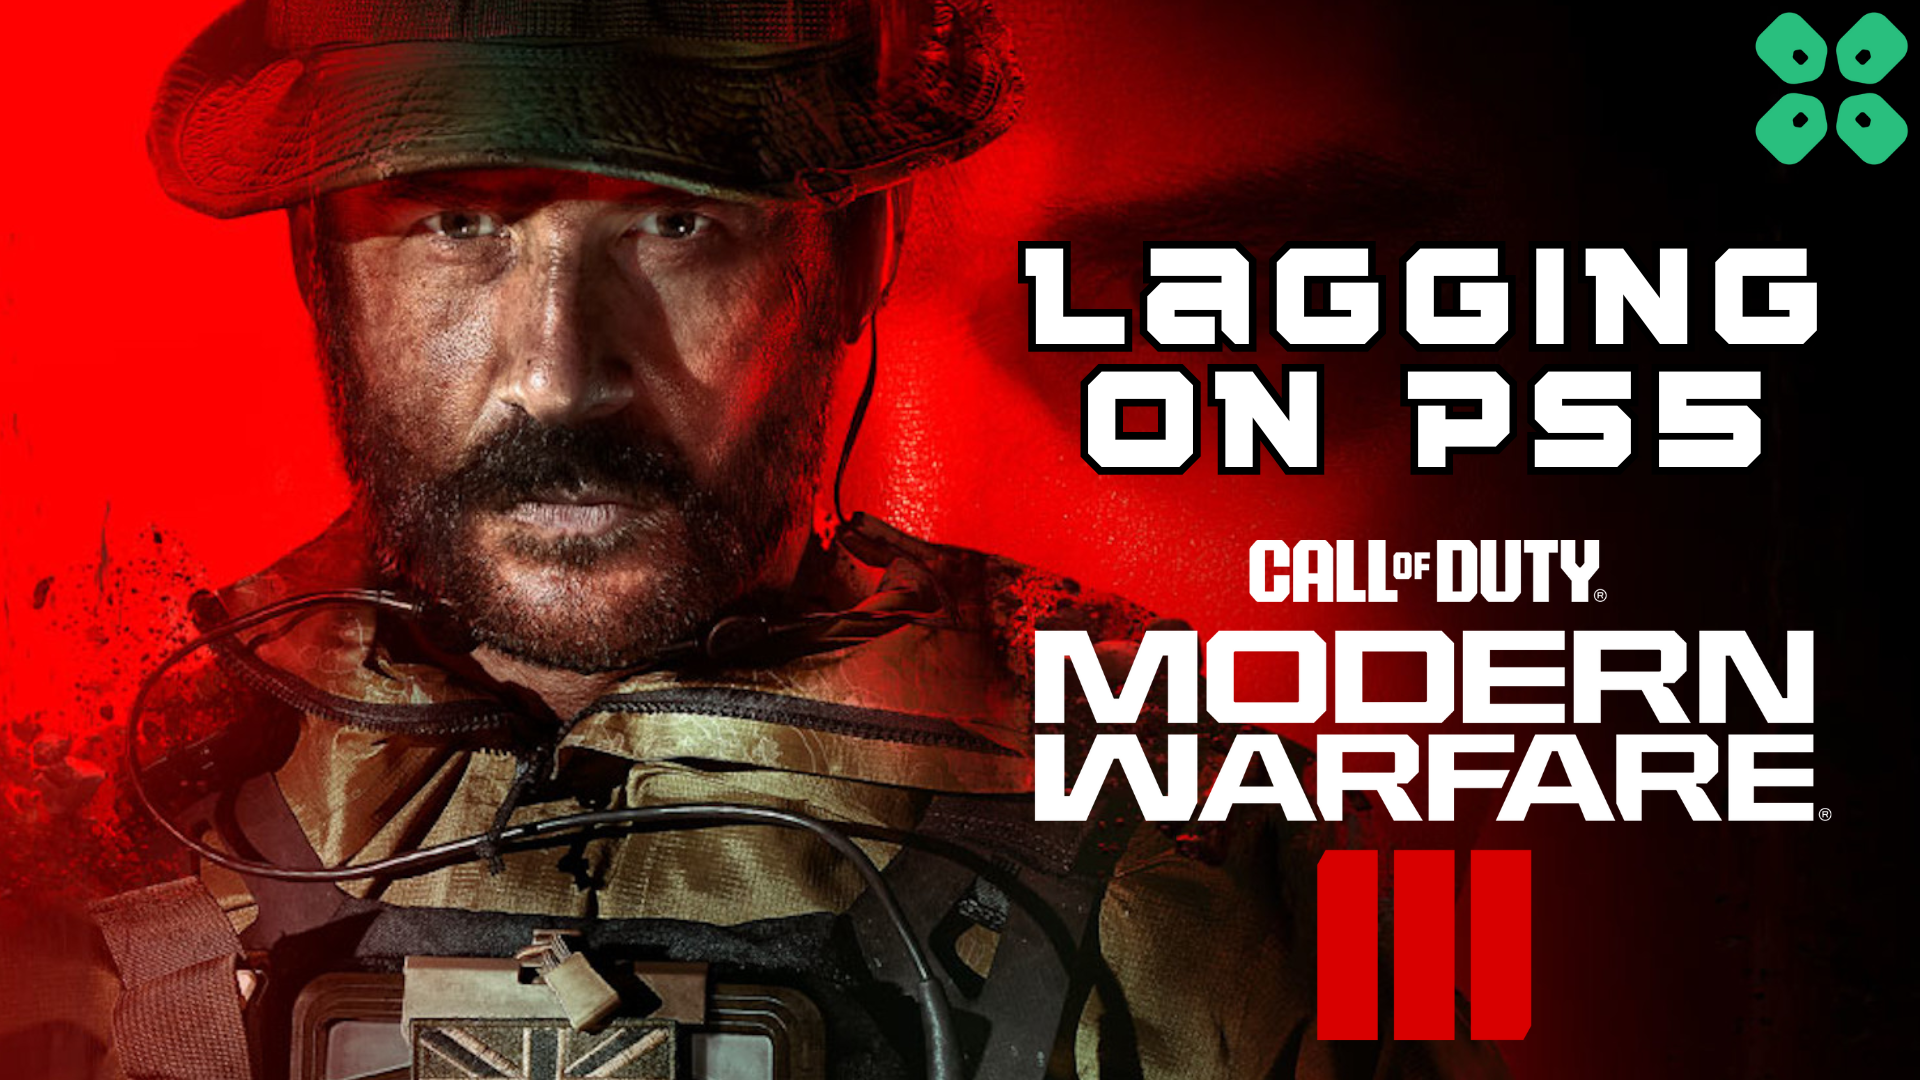 How to Fix Call of Duty Modern Warfare 3 Lagging on PS5